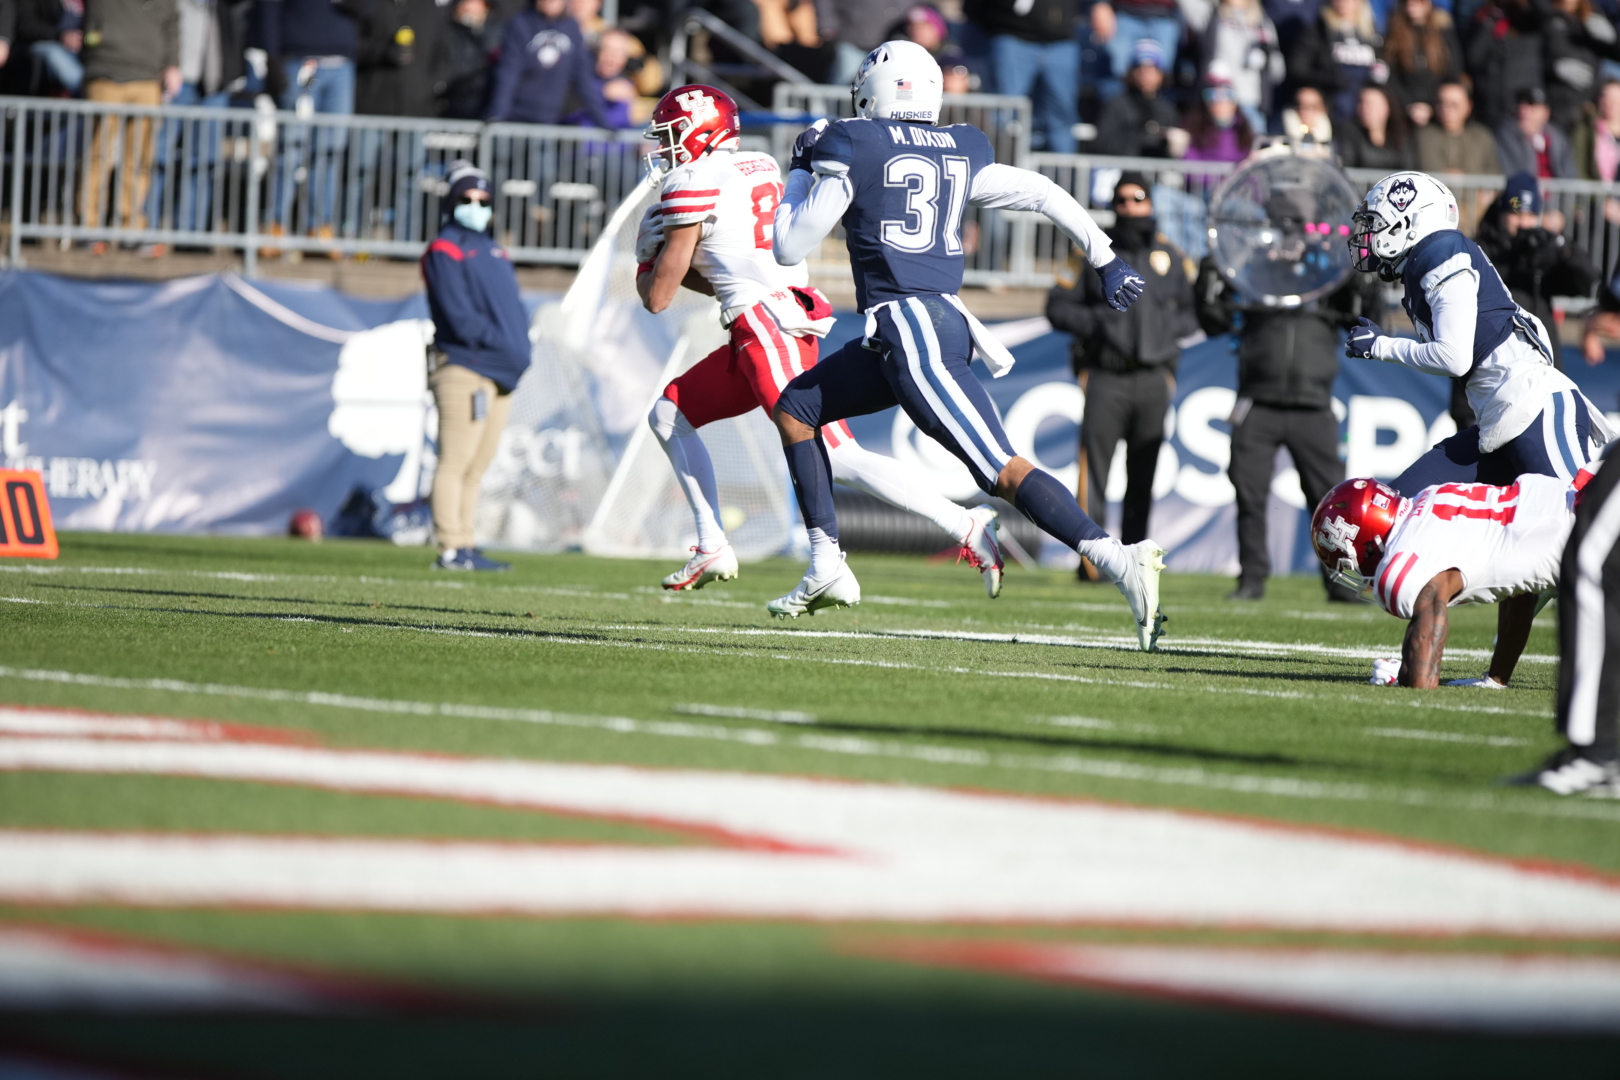 UH receiver Jake Herslow found the end zone in the second quarter against UConn on Saturday on a 49-yard touchdown pass from Clayton Tune. | Courtesy of UH athletics